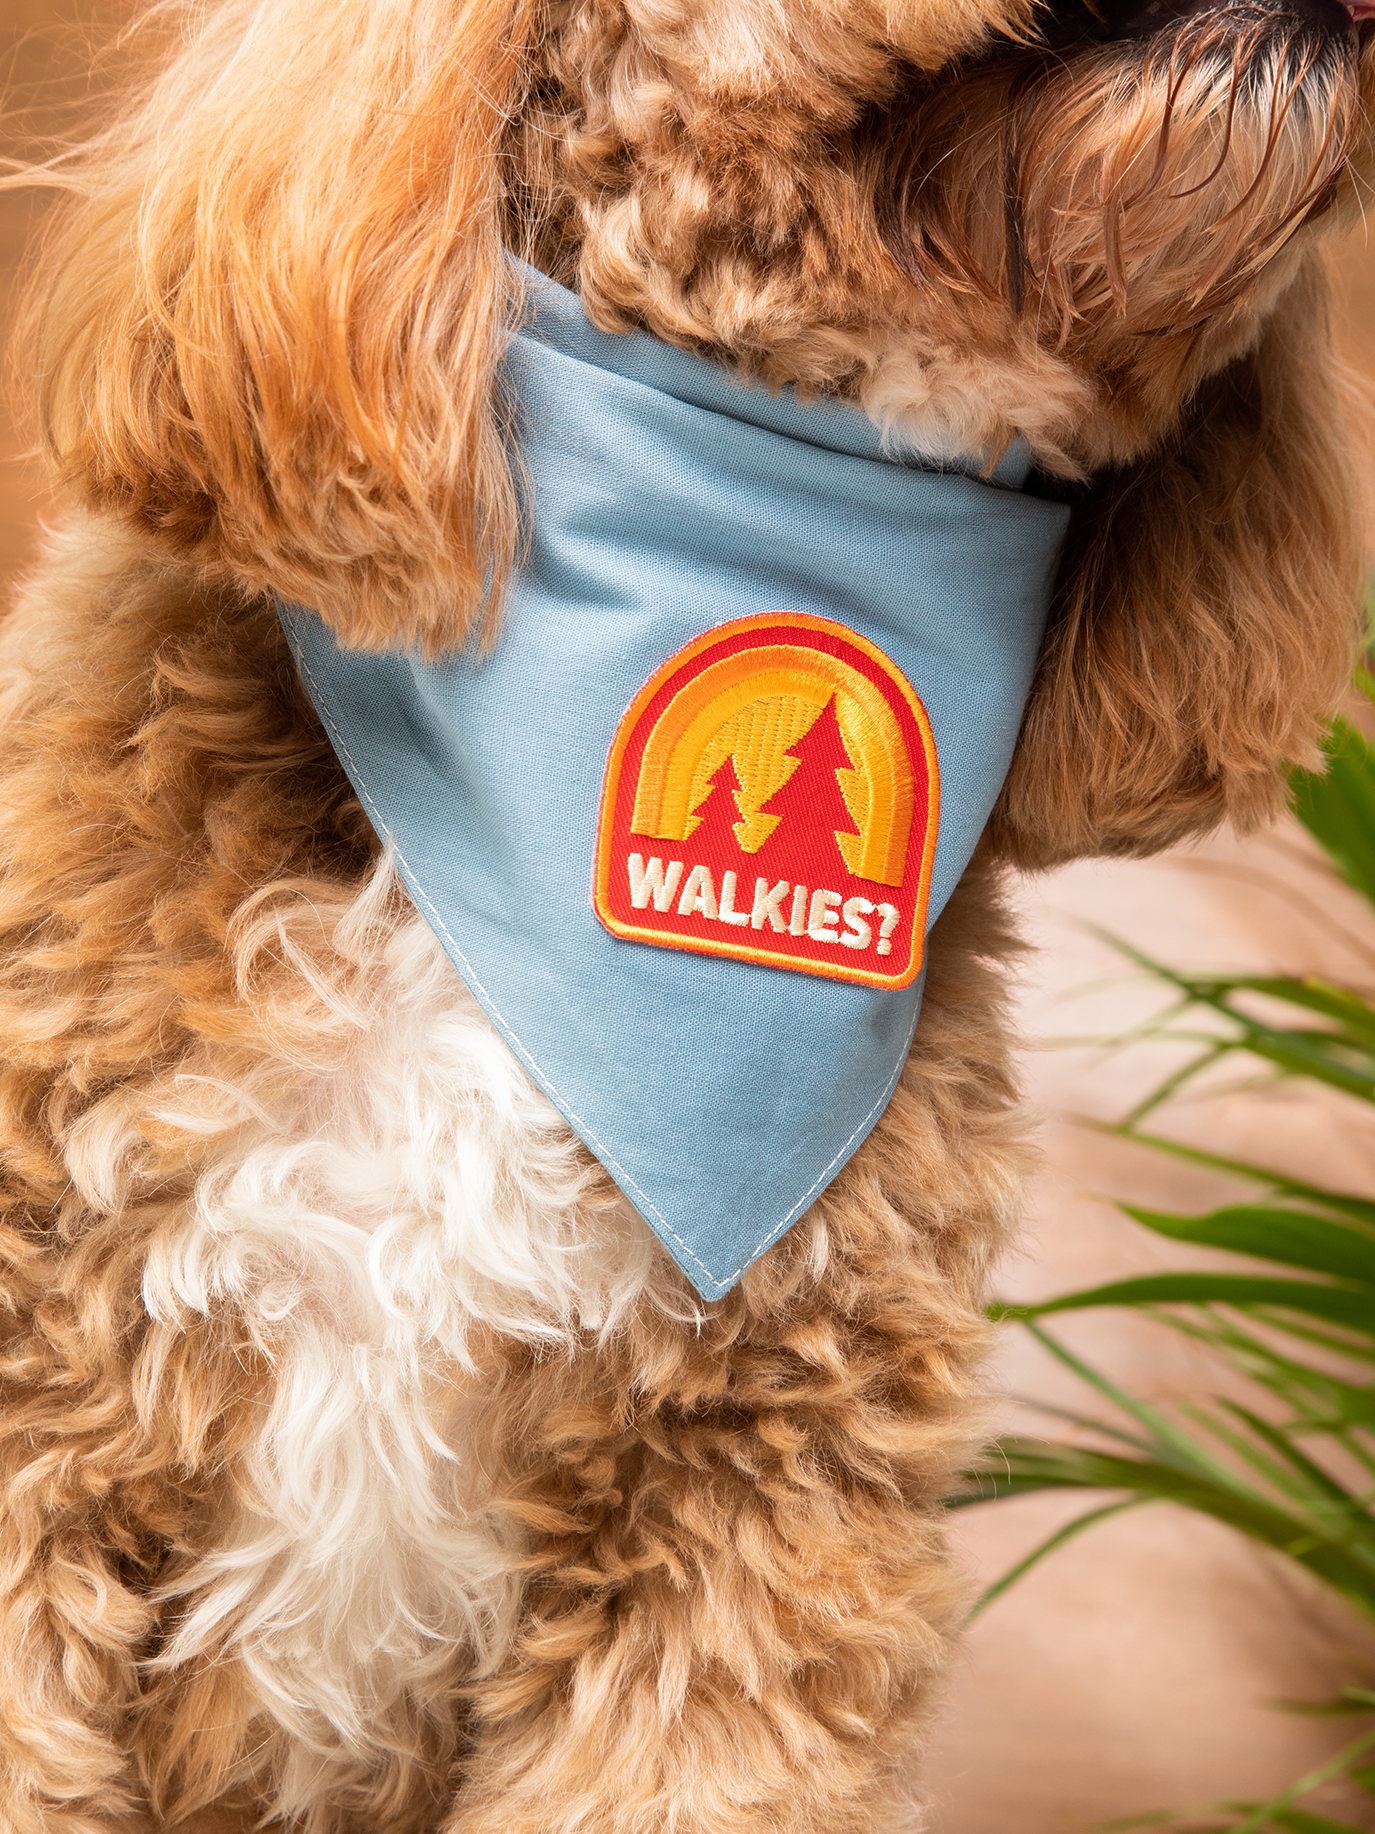 Walkies Iron-on Patch For Dogs